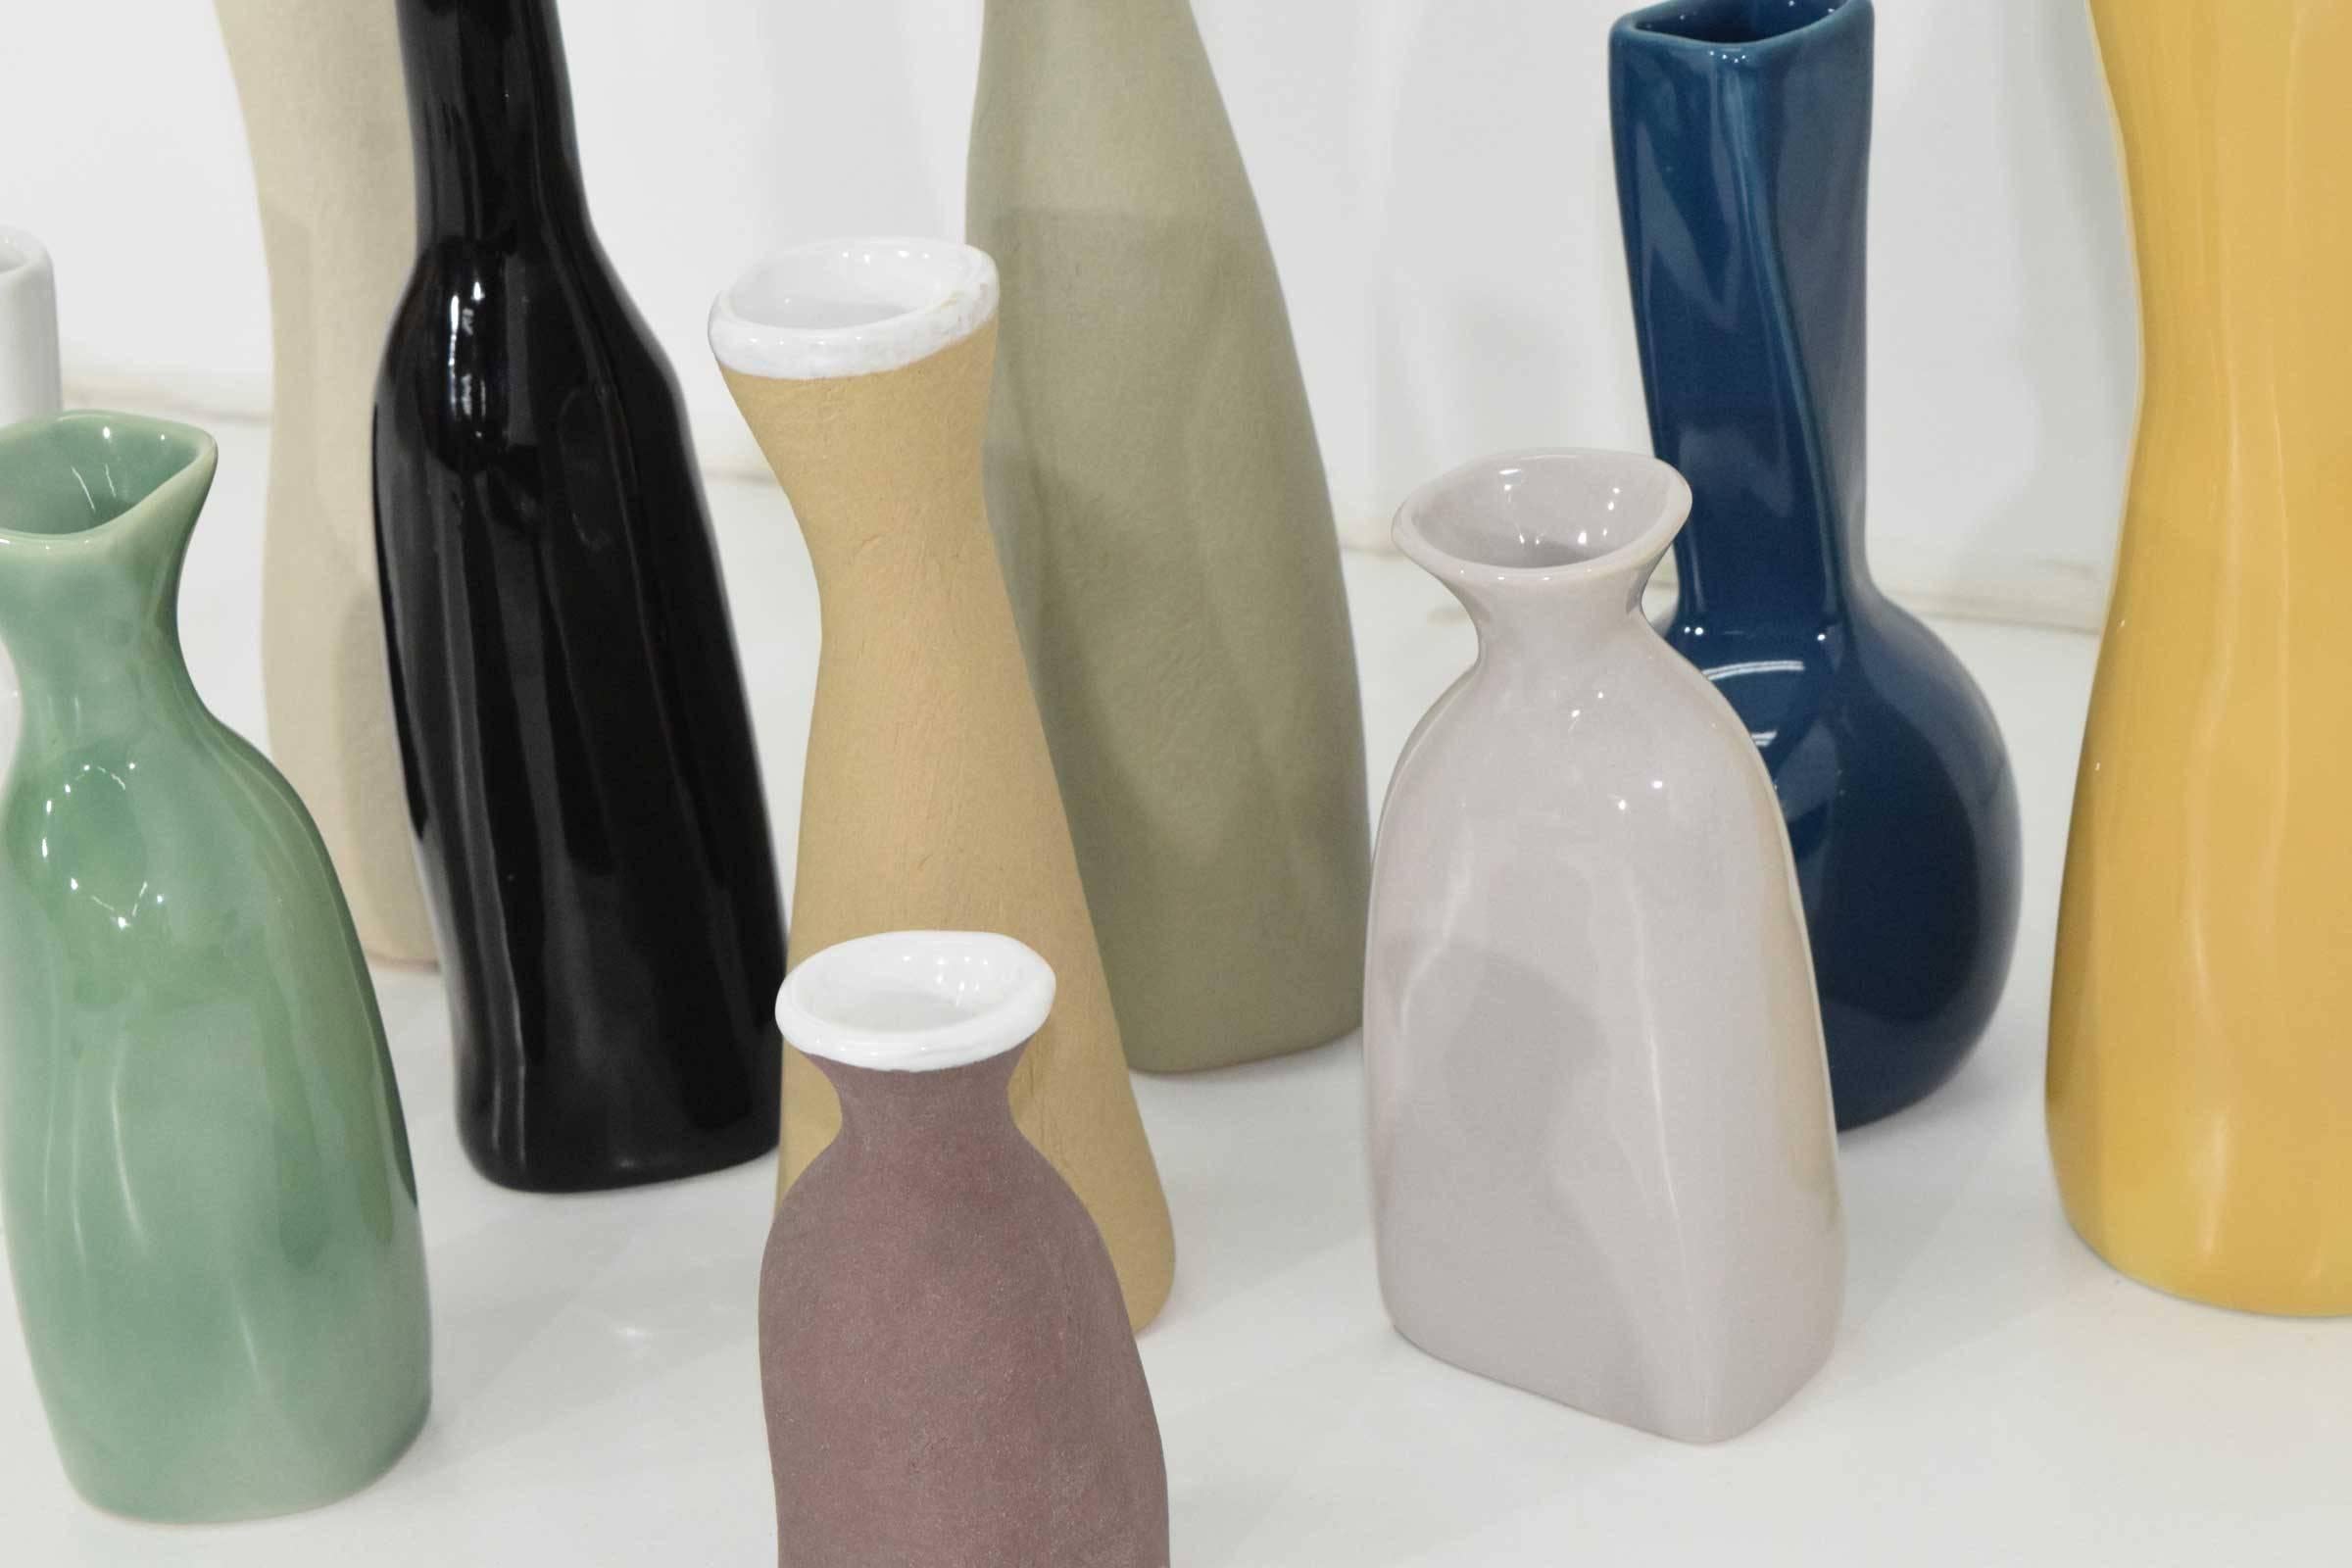 Luna Garcia, founded in 1979, was a long-term pottery maker based in Venice Beach, California and closed in 2015. They are known for their beautiful colors and glazes as well as matte finishes. Every piece in this collection is signed. Measurements